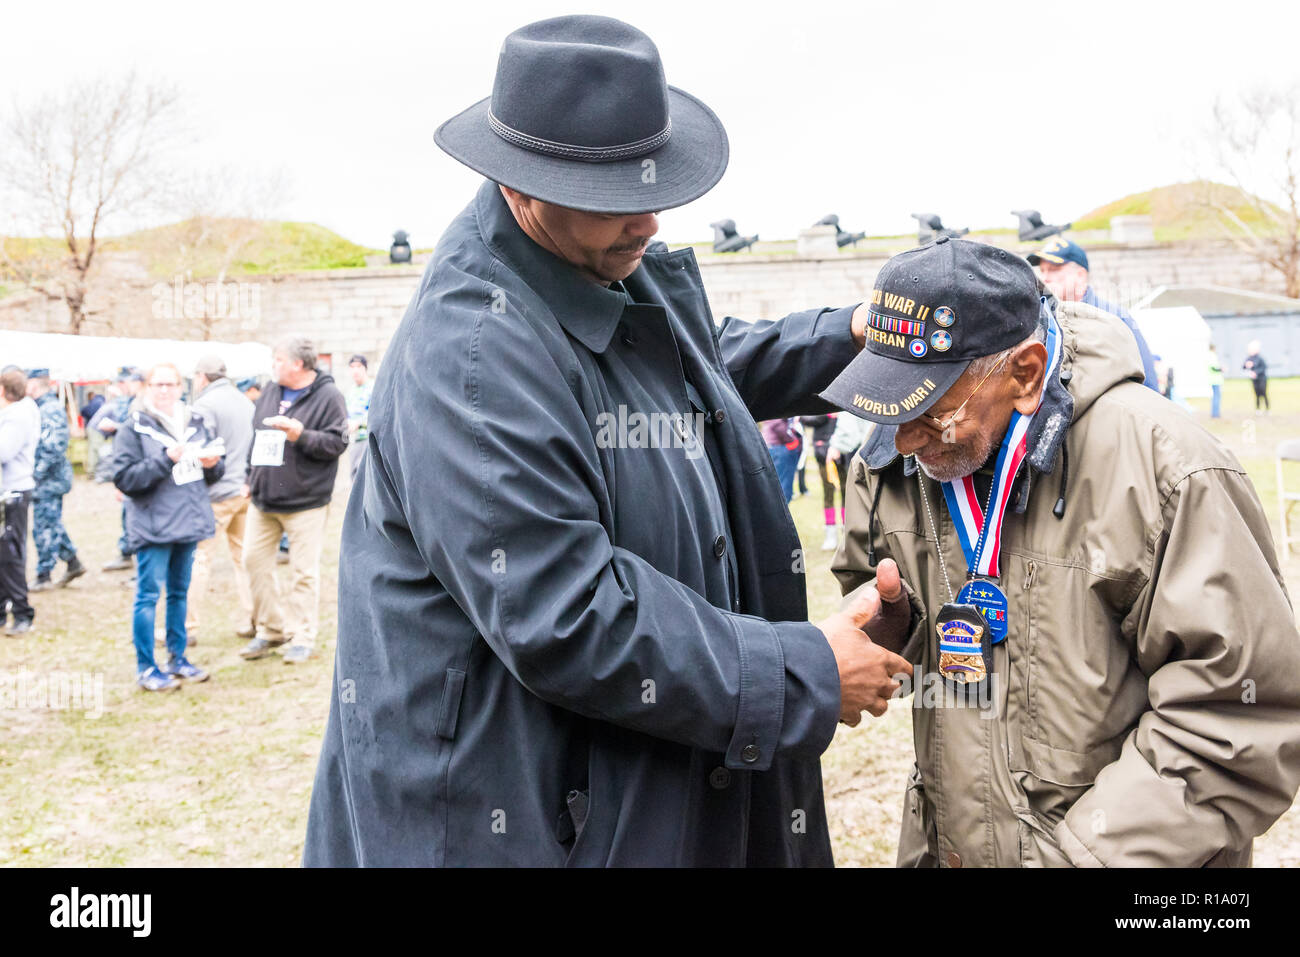 Boston, Massachusetts, USA. 10th November, 2018. At the Disabled American Veterans 5k charity event Boston Police Commissioner William Gross thanks a World War II veteran for his service and shakes his hand after putting his police badge around his neck as a gesture of respect. Maia Kennedy/Alamy Live News Stock Photo